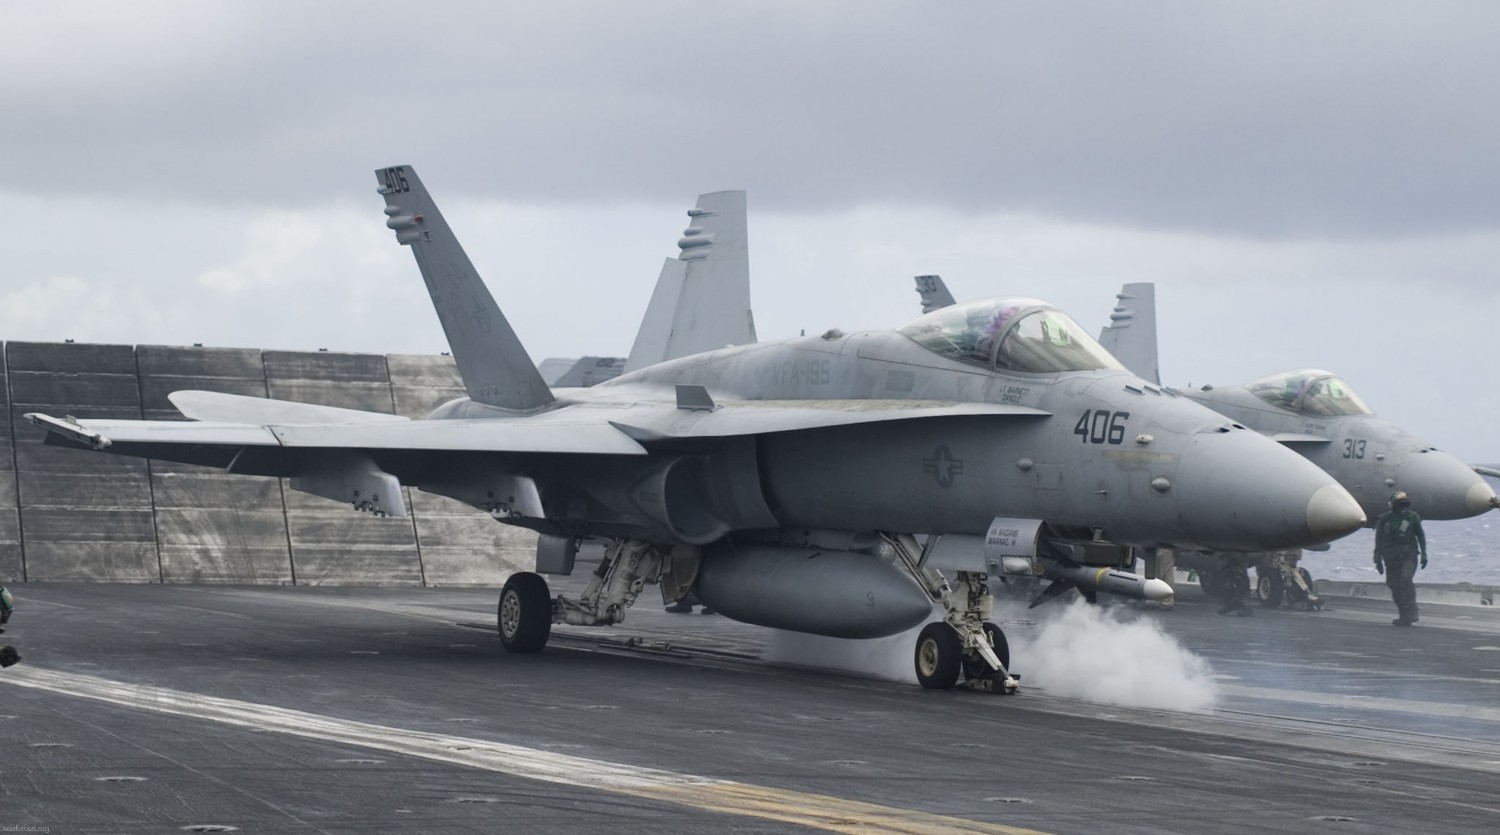 vfa-195 dambusters strike fighter squadron navy f/a-18c hornet carrier air wing cvw-5 uss kitty hawk cv-63 109